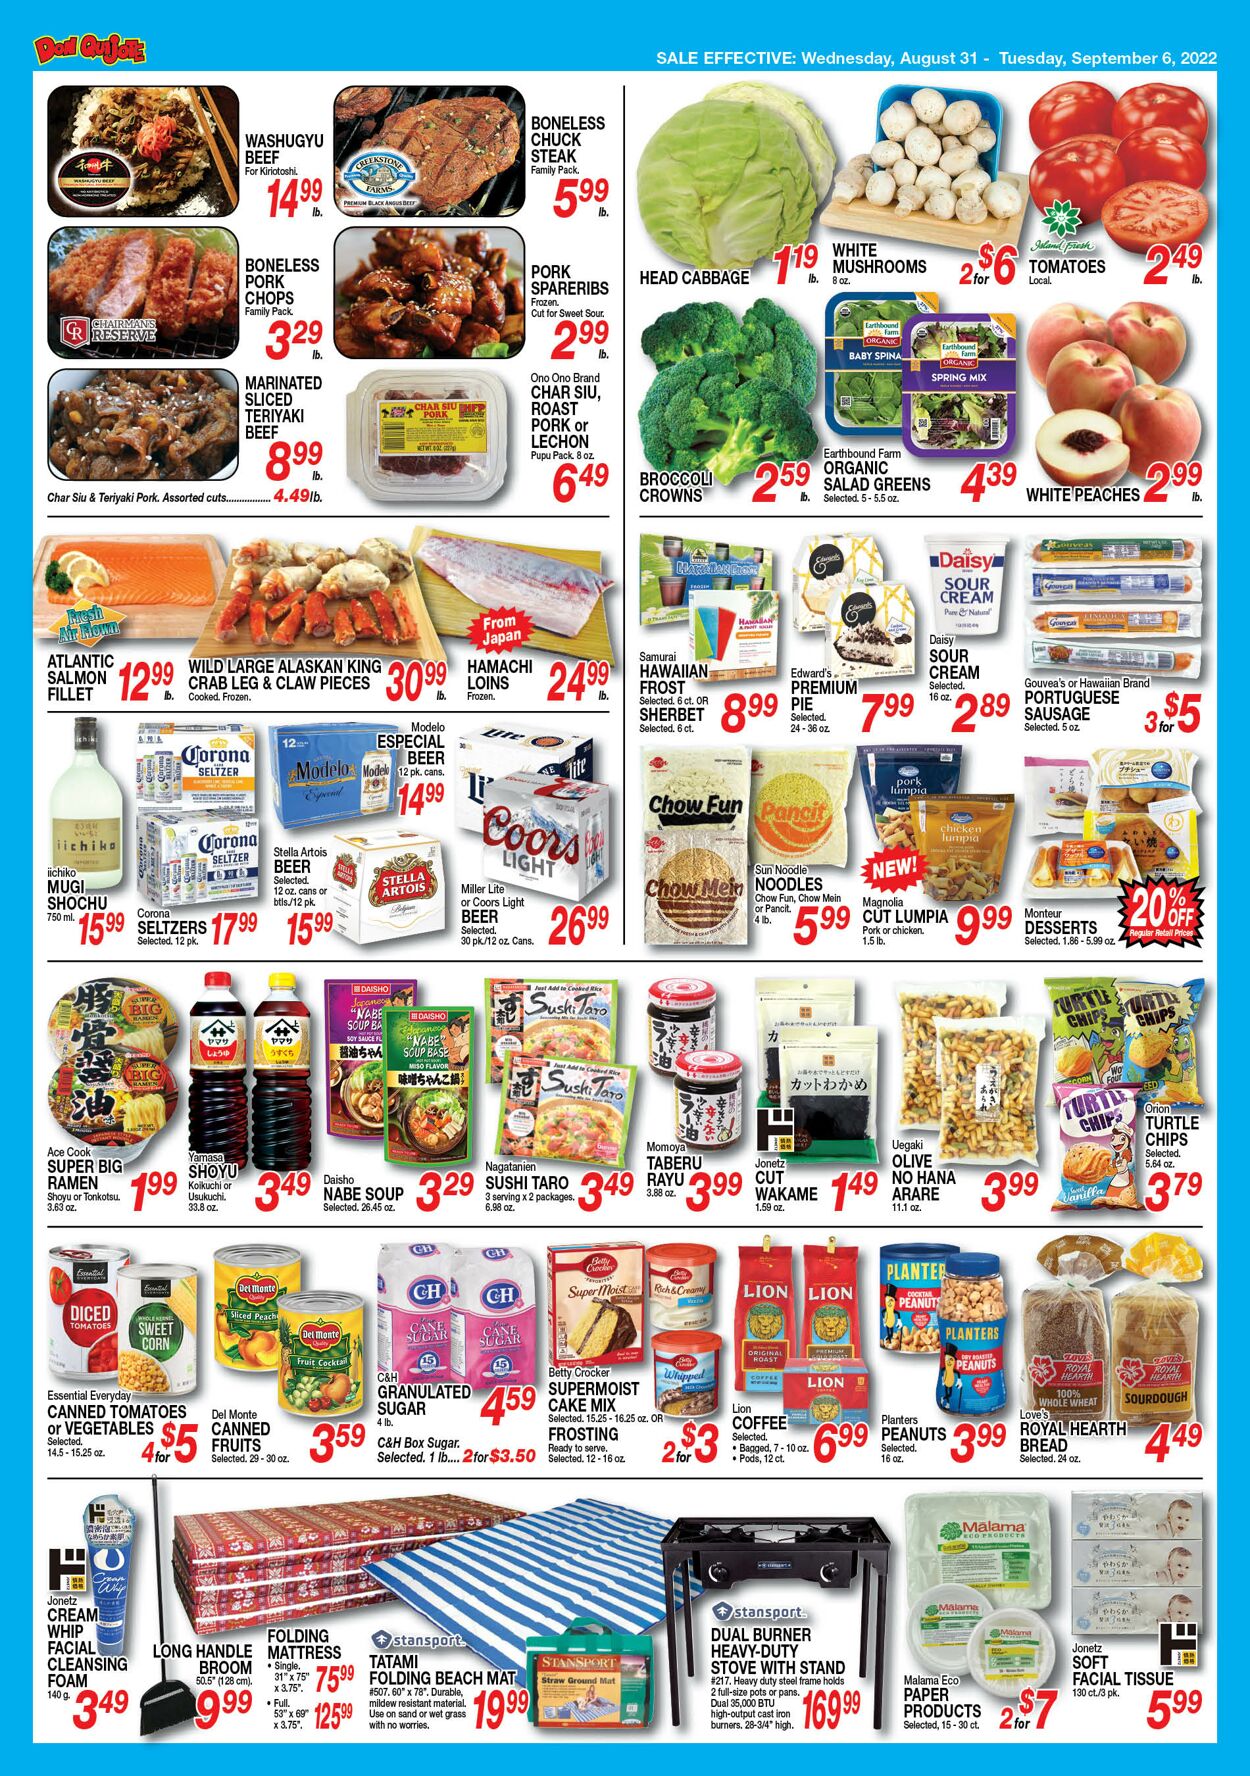 Catalogue Don Quijote Hawaii from 08/31/2022